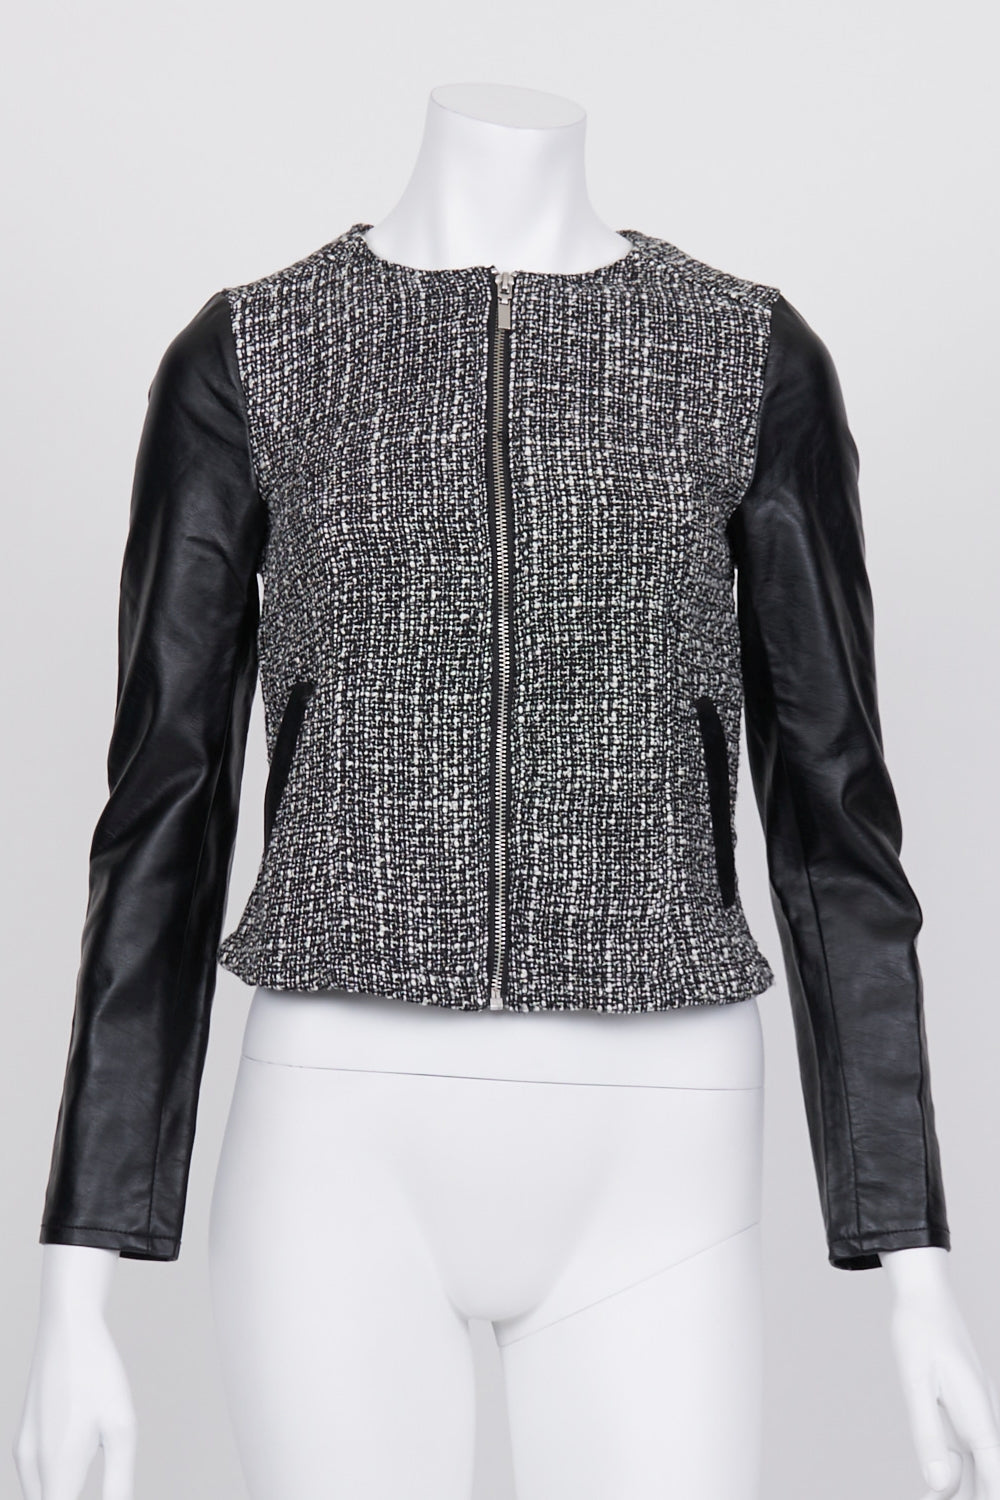 H&M Black And White Patterned Jacket 4